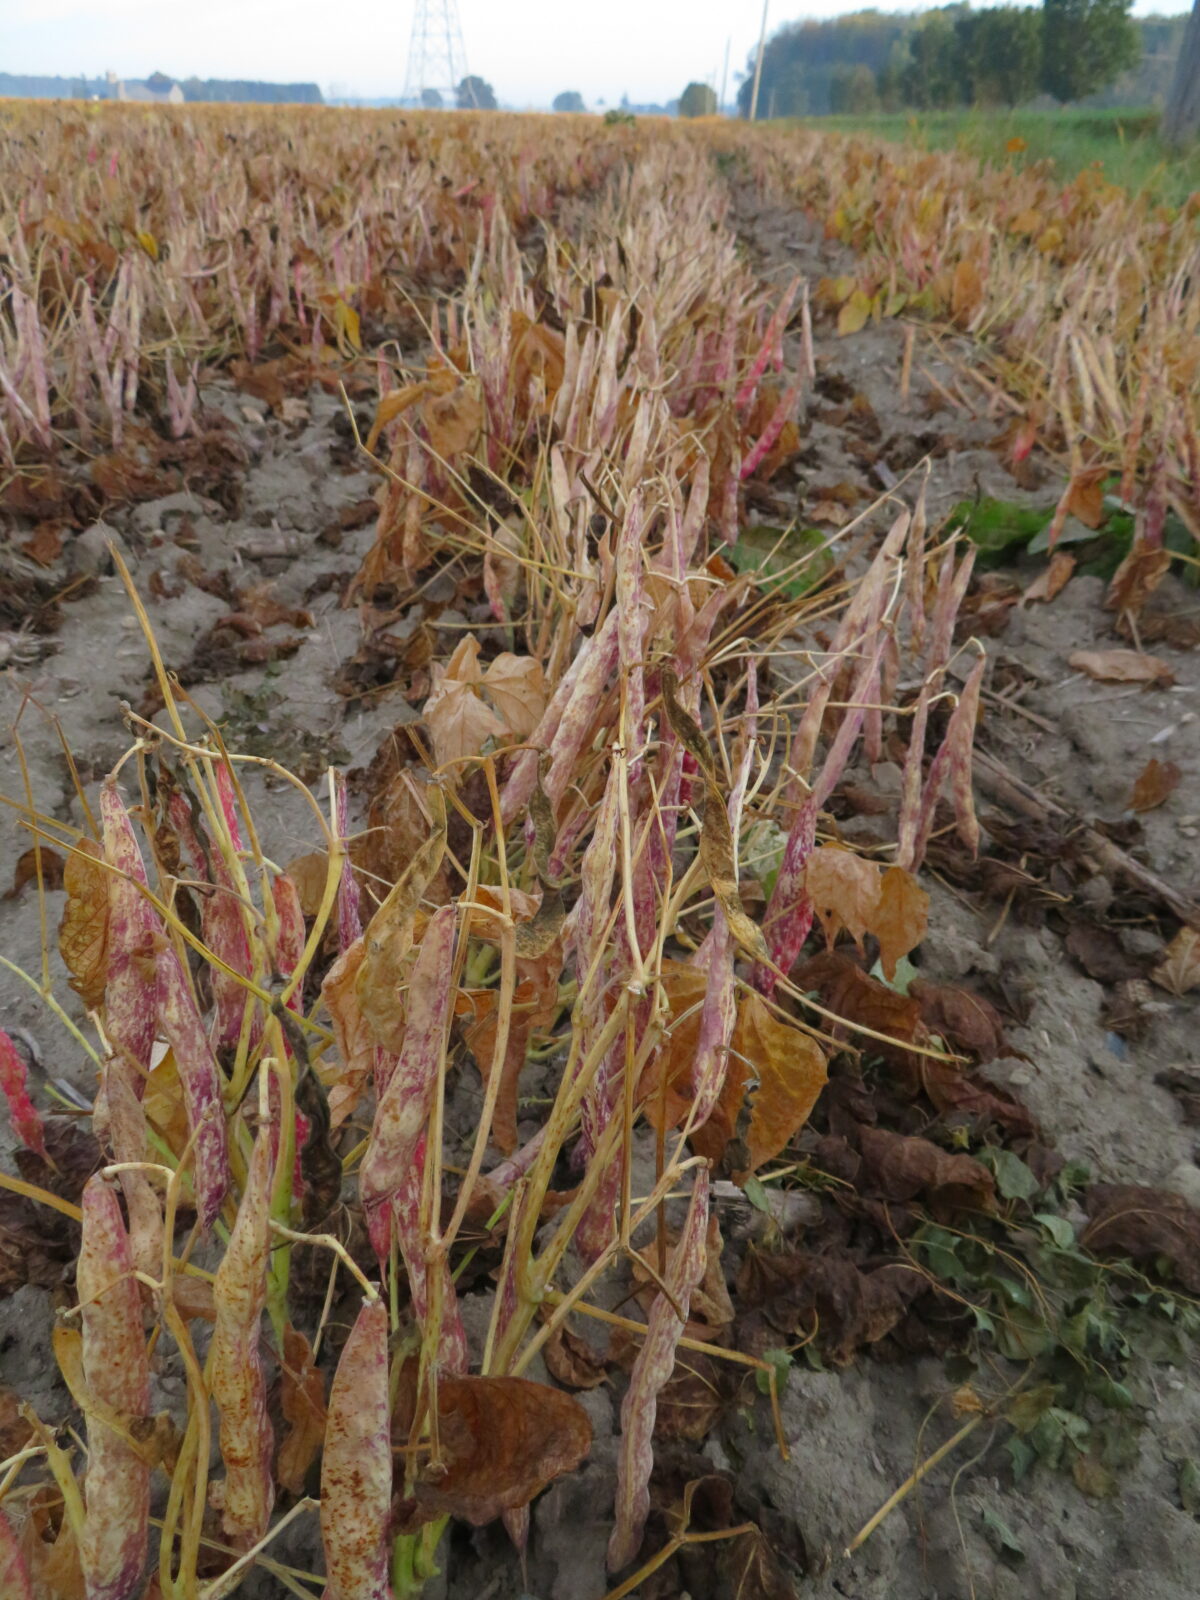 Several rows of desiccated bean pods